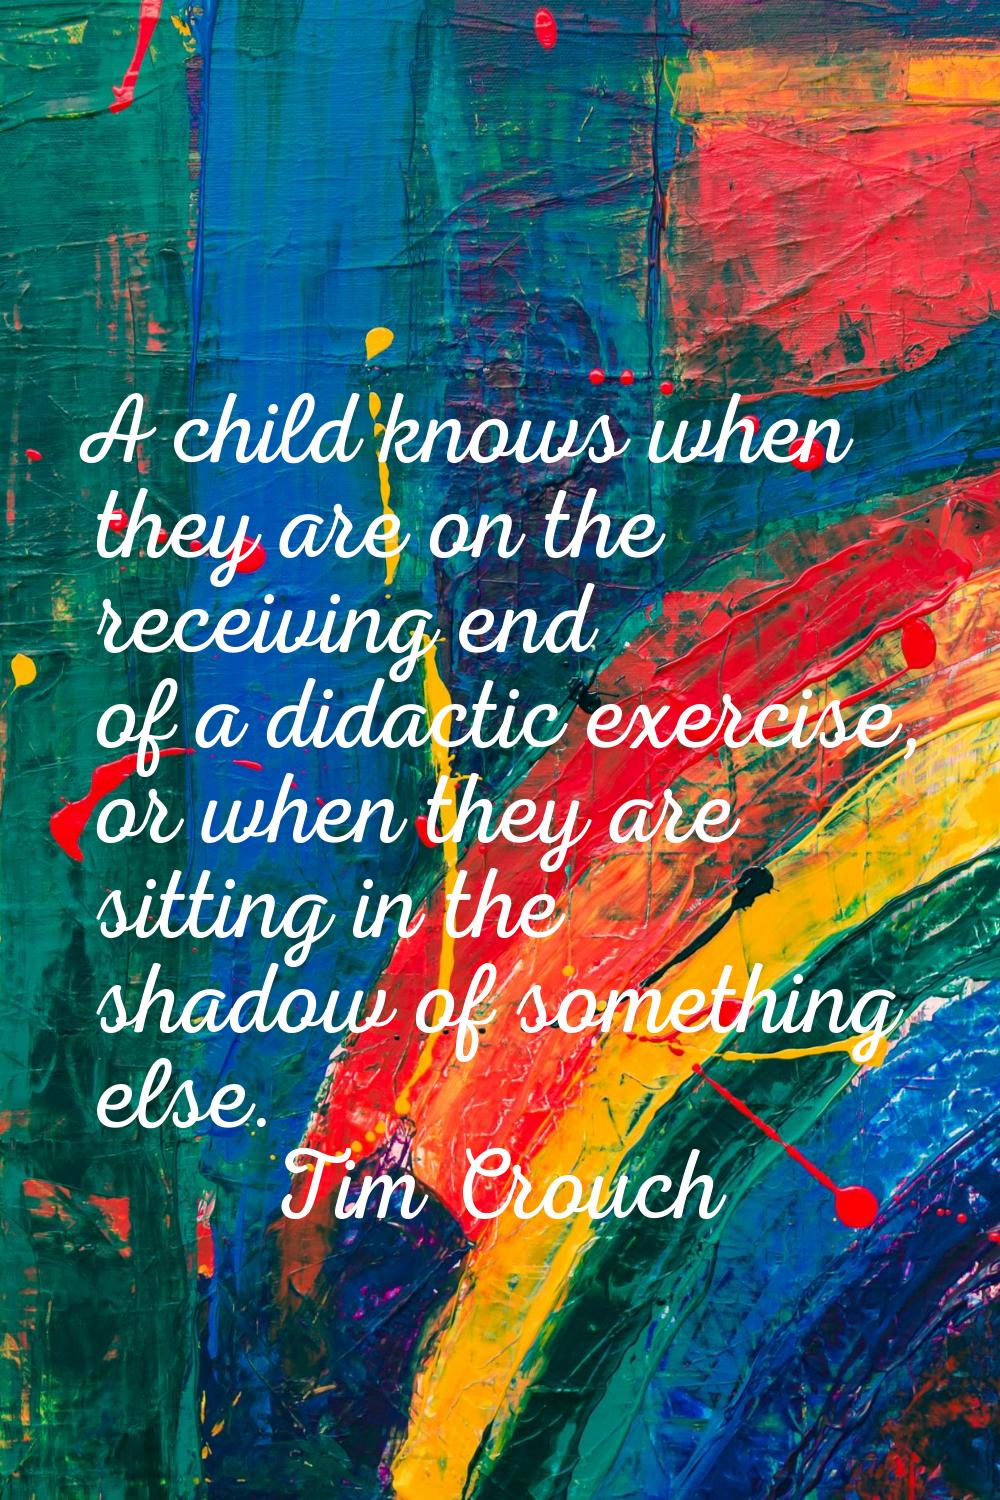 A child knows when they are on the receiving end of a didactic exercise, or when they are sitting i